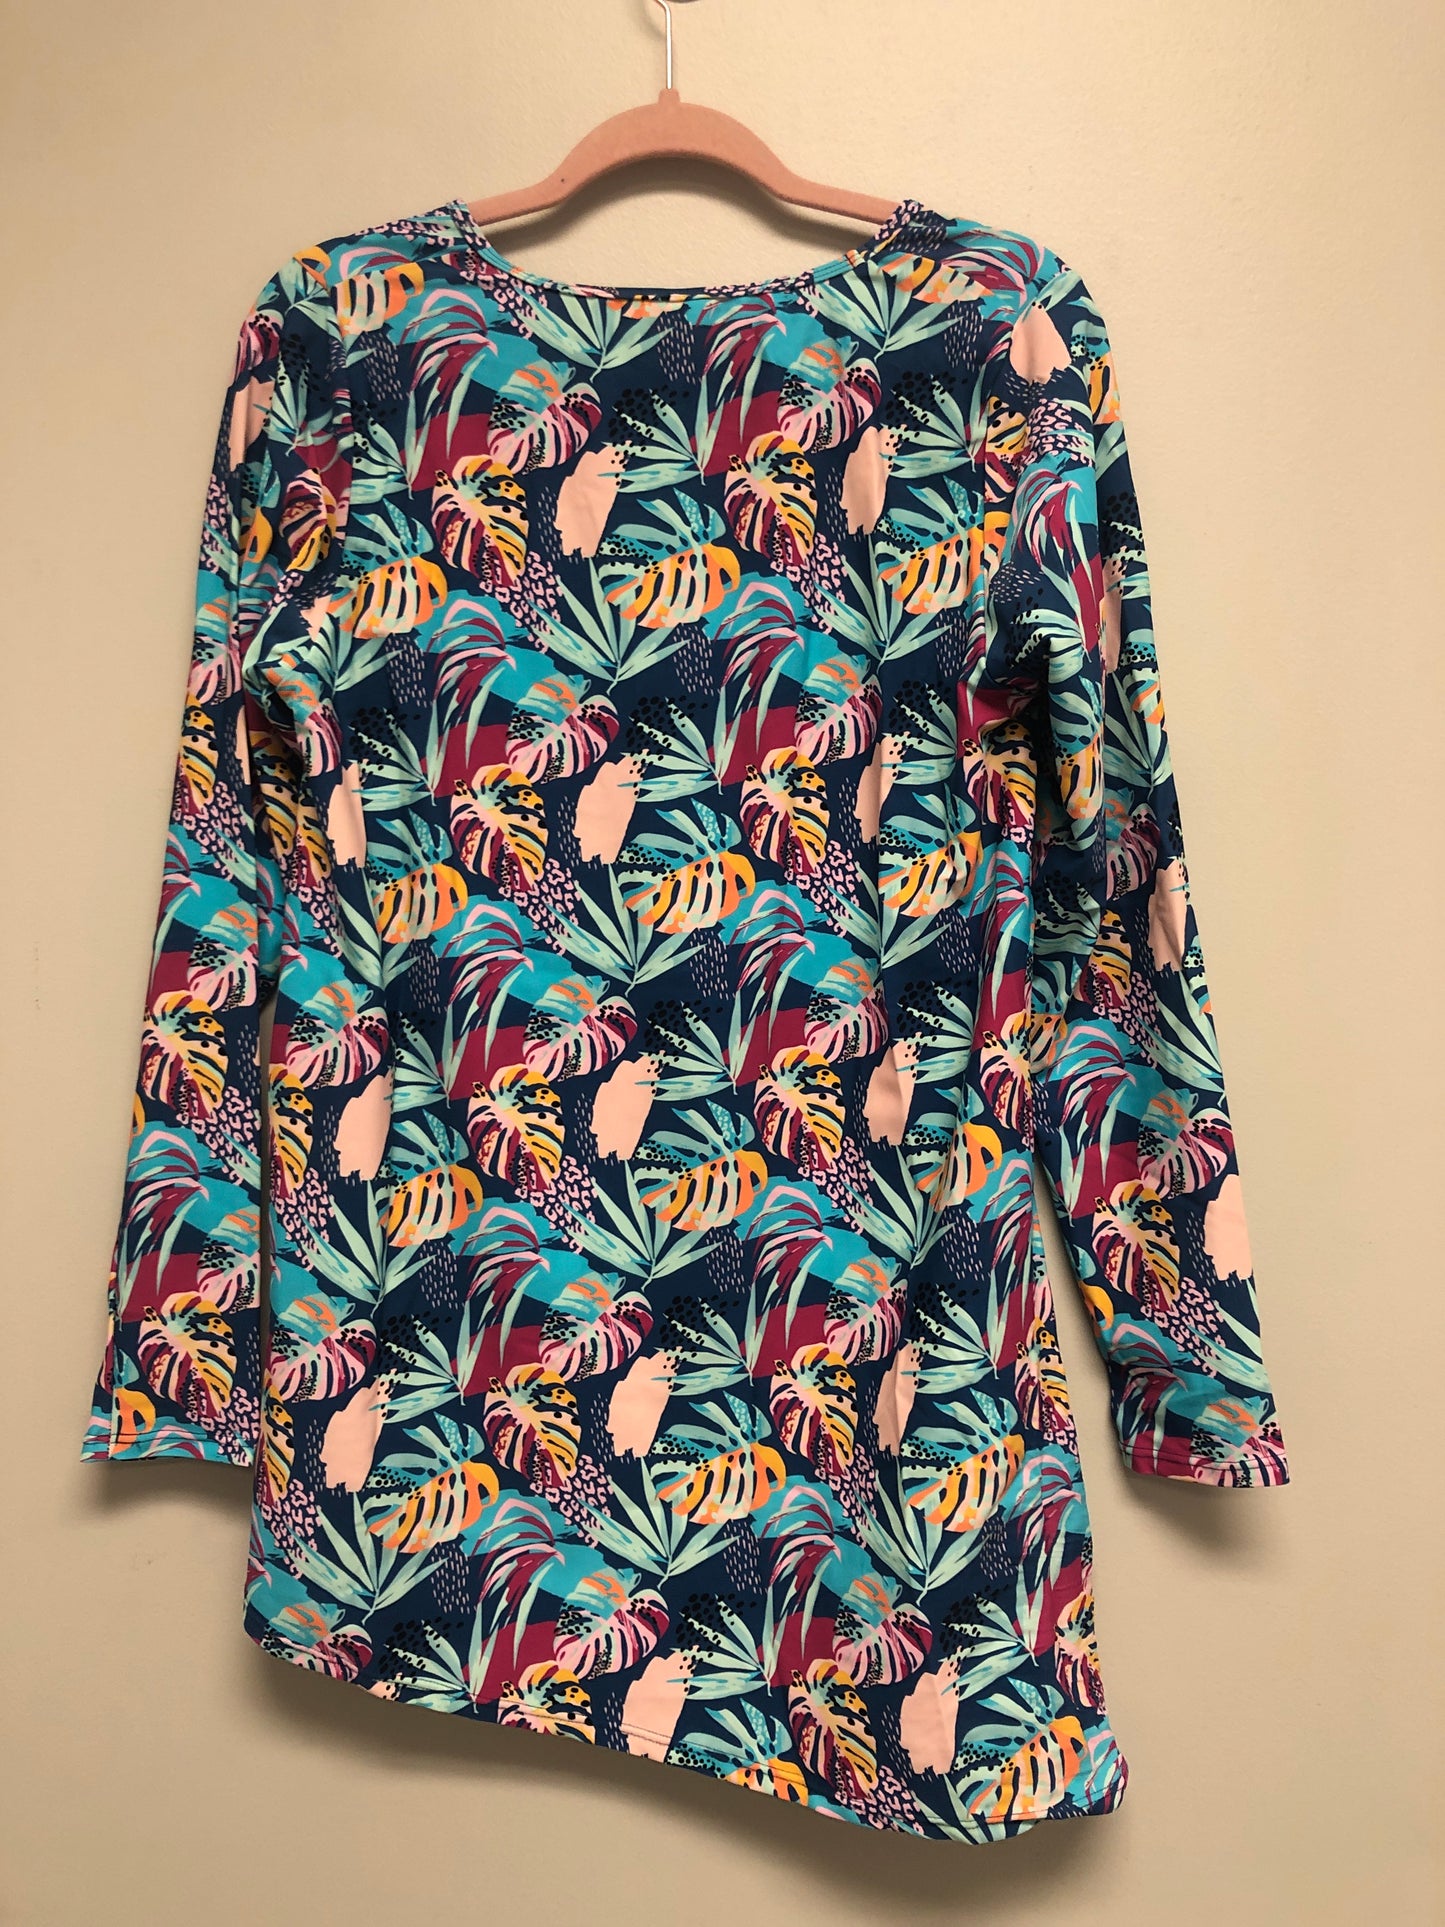 Outlet 6574 - Latched Mama Asymmetrical Nursing Swim Cover Up - Final Sale - Tropical Teal - Large